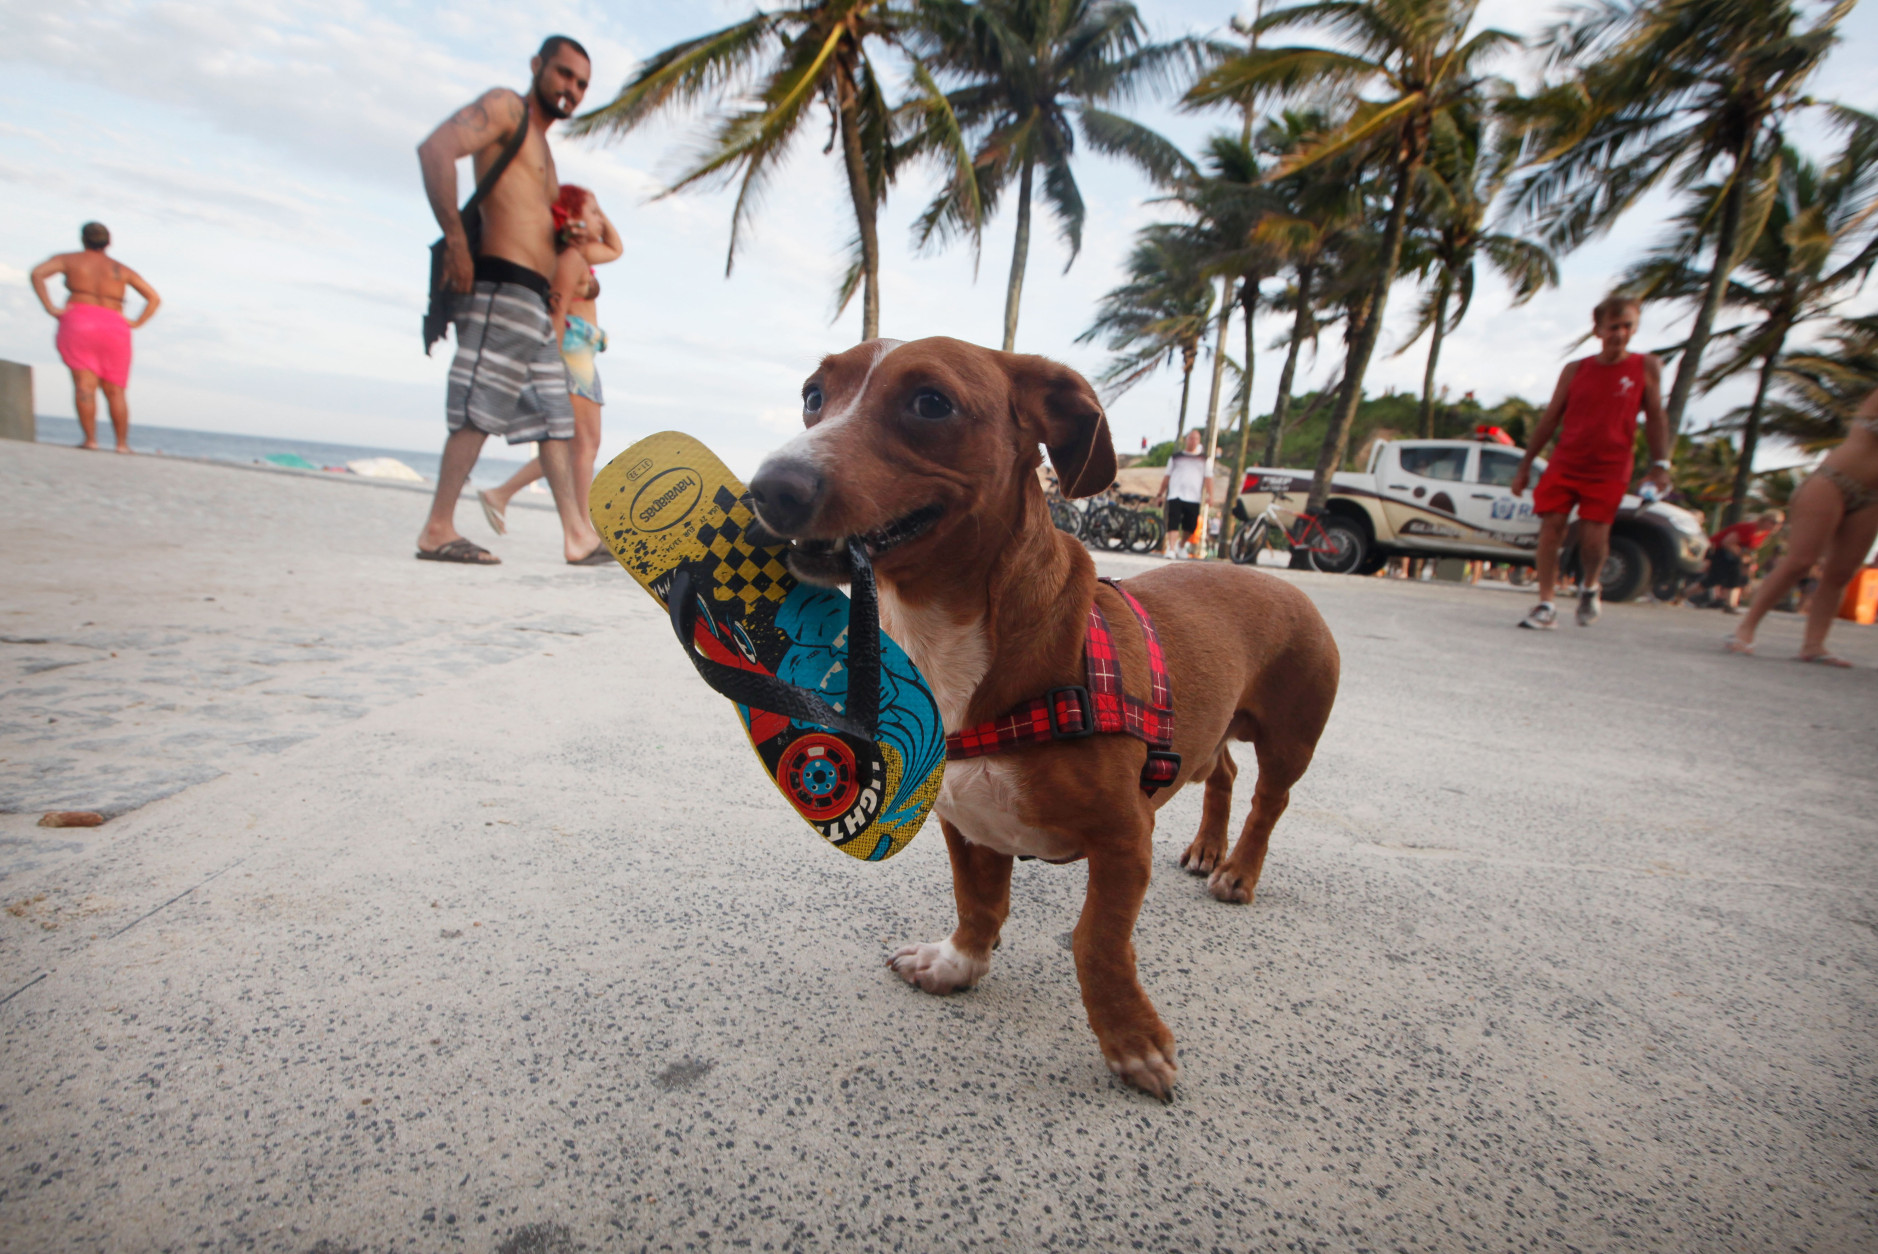 RIO DE JANEIRO, BRAZIL - FEBRUARY 28:  A dog carries a flip-flop near Ipanema beach, a popular tourist destination in Rio, on February 28, 2016 in Rio de Janeiro, Brazil. The Zika virus outbreak, which may be linked to a surge in microcephaly cases in the country, is threatening tourism in Brazil which expects to profit from hundreds of thousands of foreign visitors travelling to Rio de Janeiro during the Rio 2016 Olympic Games. The World Health Organization (WHO) has declared the outbreak, centered in Brazil, to be a "public health emergency of international concern."   (Photo by Mario Tama/Getty Images)